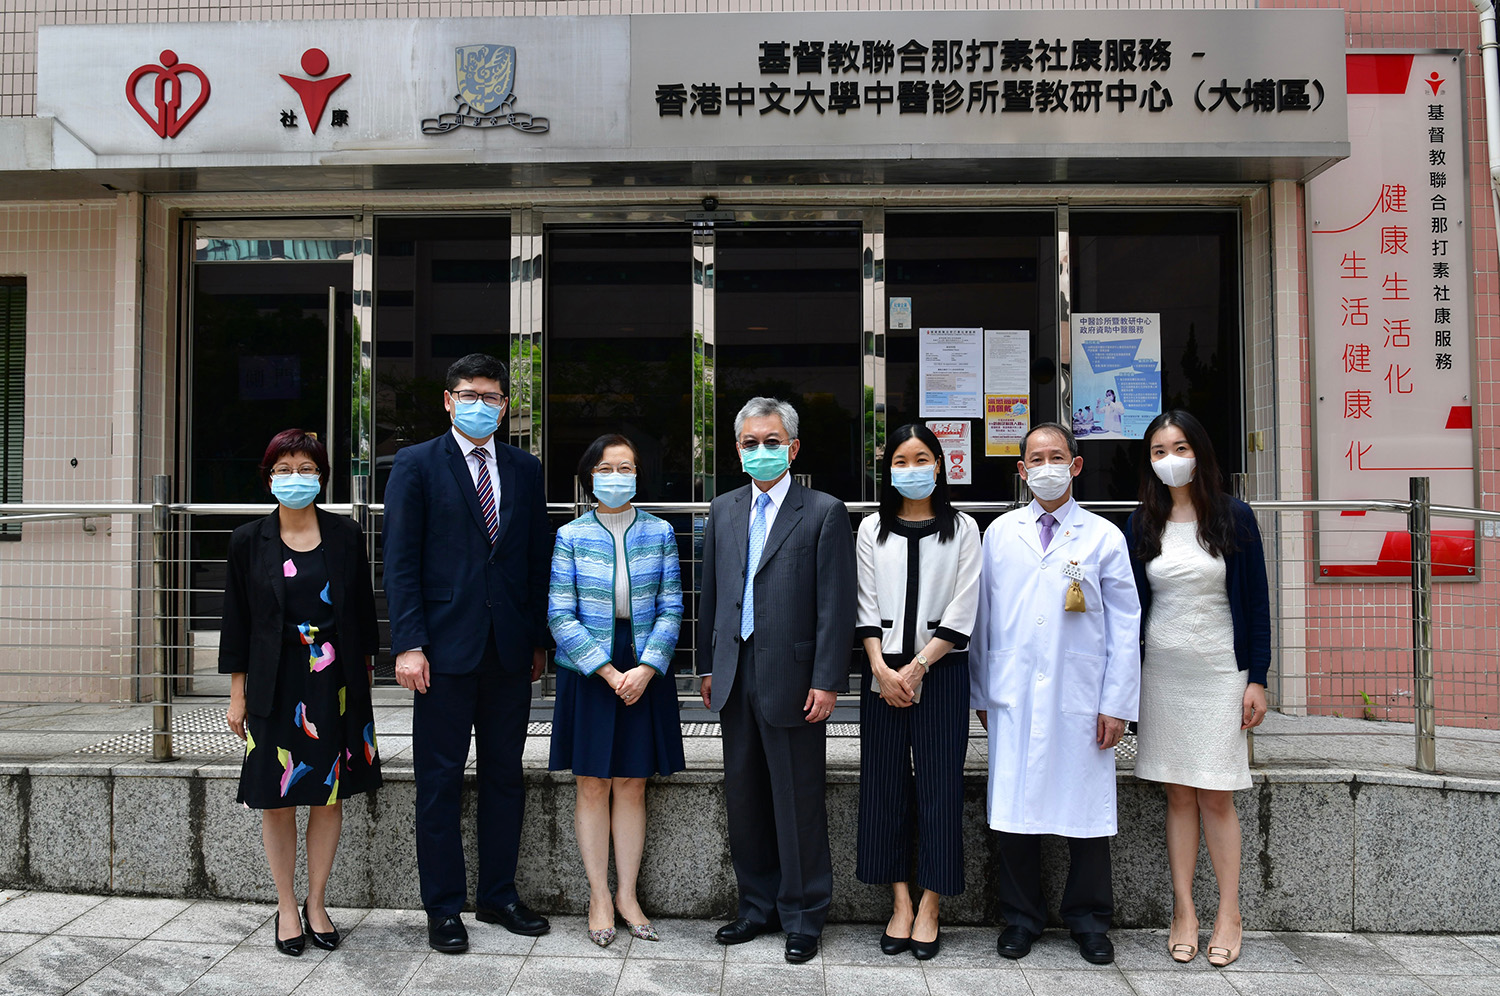 Chinese Medicine clinics present an option for fighting the epidemic and rehabilitation (14.5.2020)